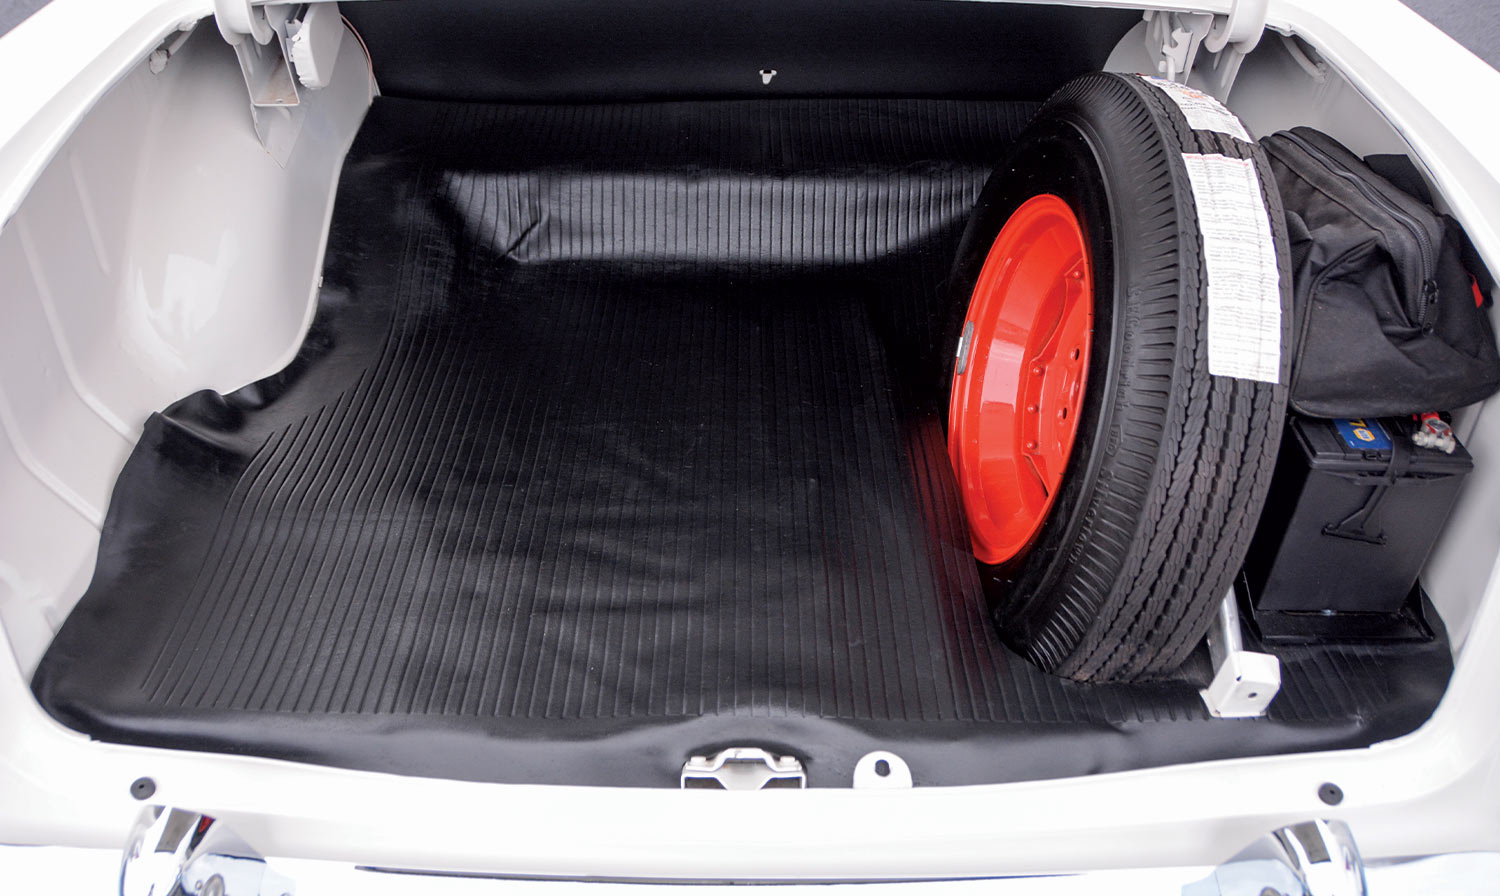 view inside the ’55 Chevy Delray's boot that holds a spare tire a supply bag and a spare battery